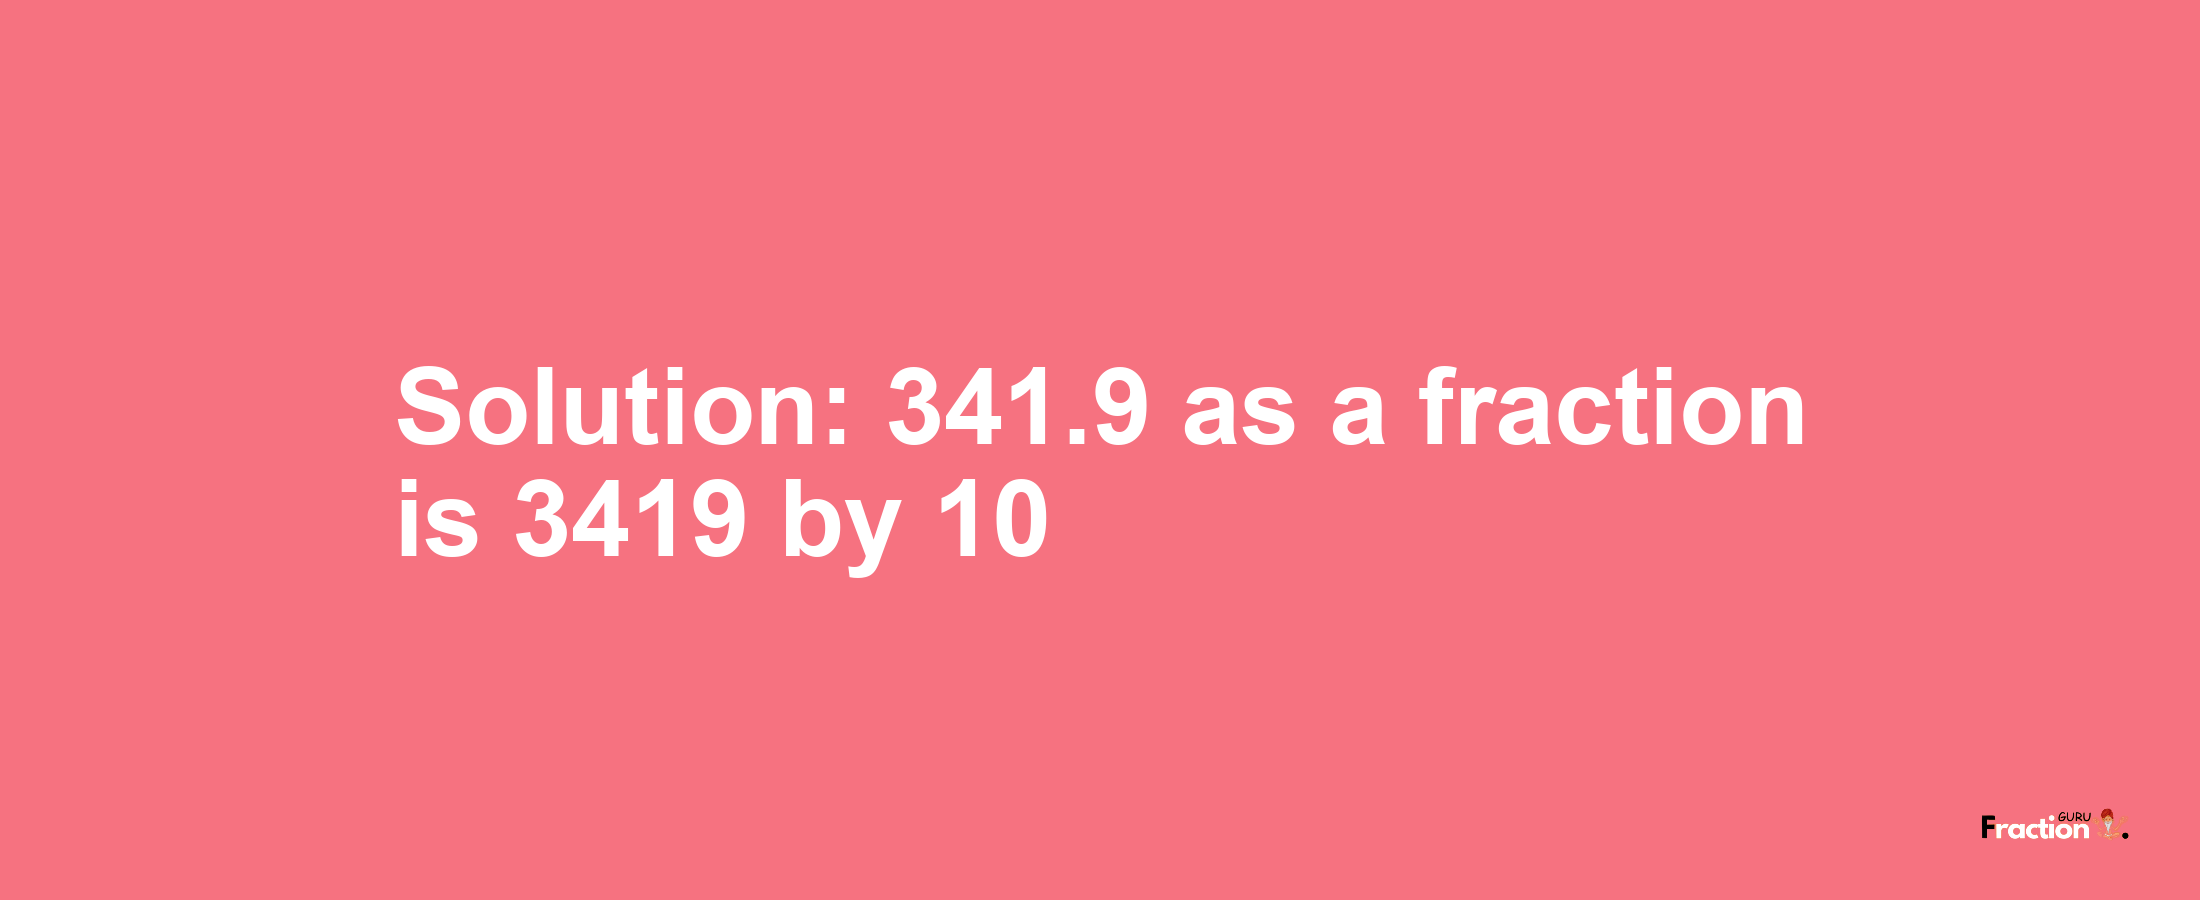 Solution:341.9 as a fraction is 3419/10